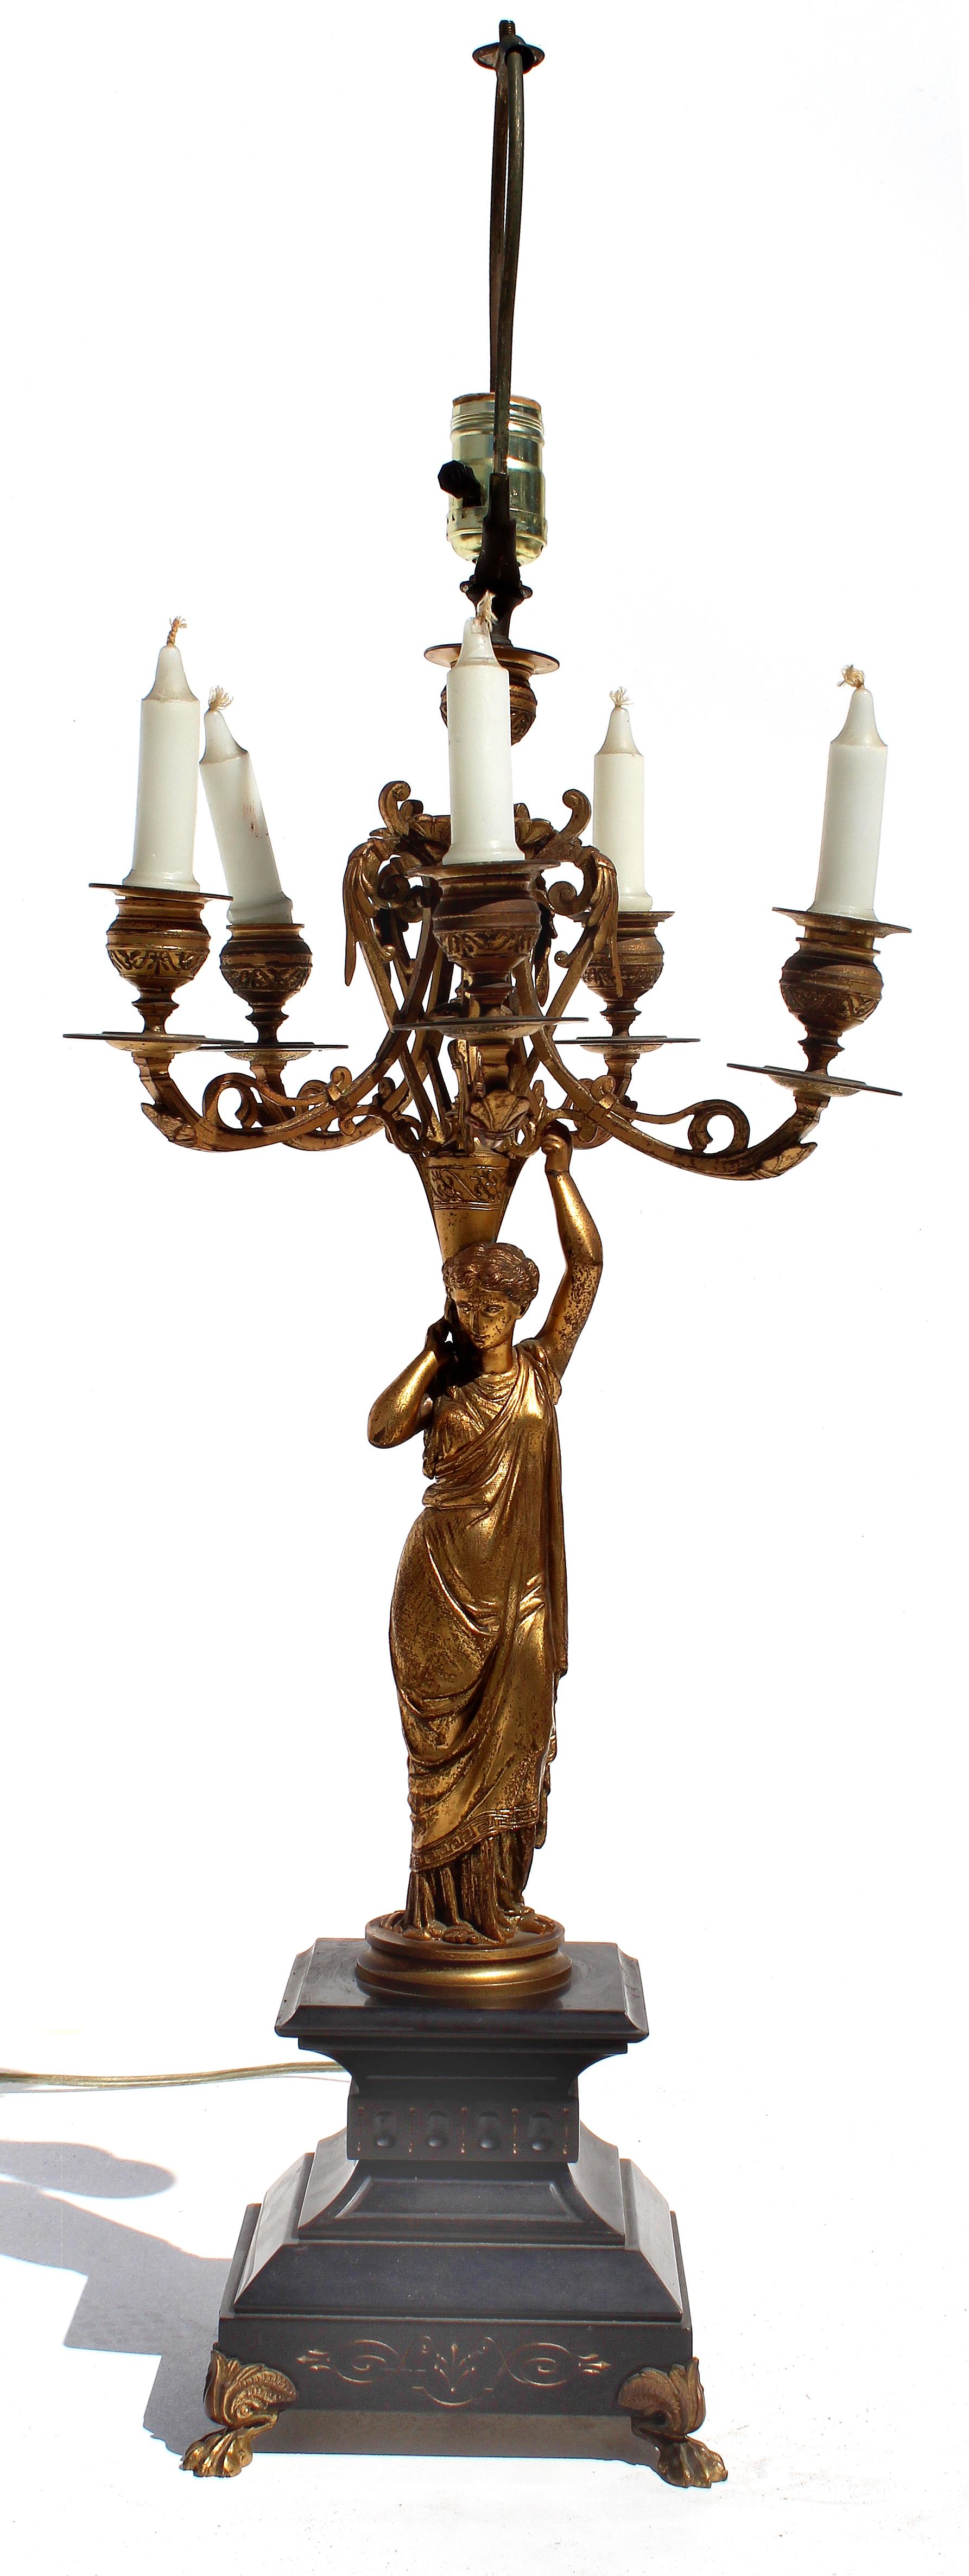 French 19th Century Bronze Doré and Marble Figural Candelabra, Mounted as a Lamp

Offered for sale is a French 19th century bronze doré and marble figural candelabra, electrified and mounted as a lamp. A draped female figure supports the candelabra